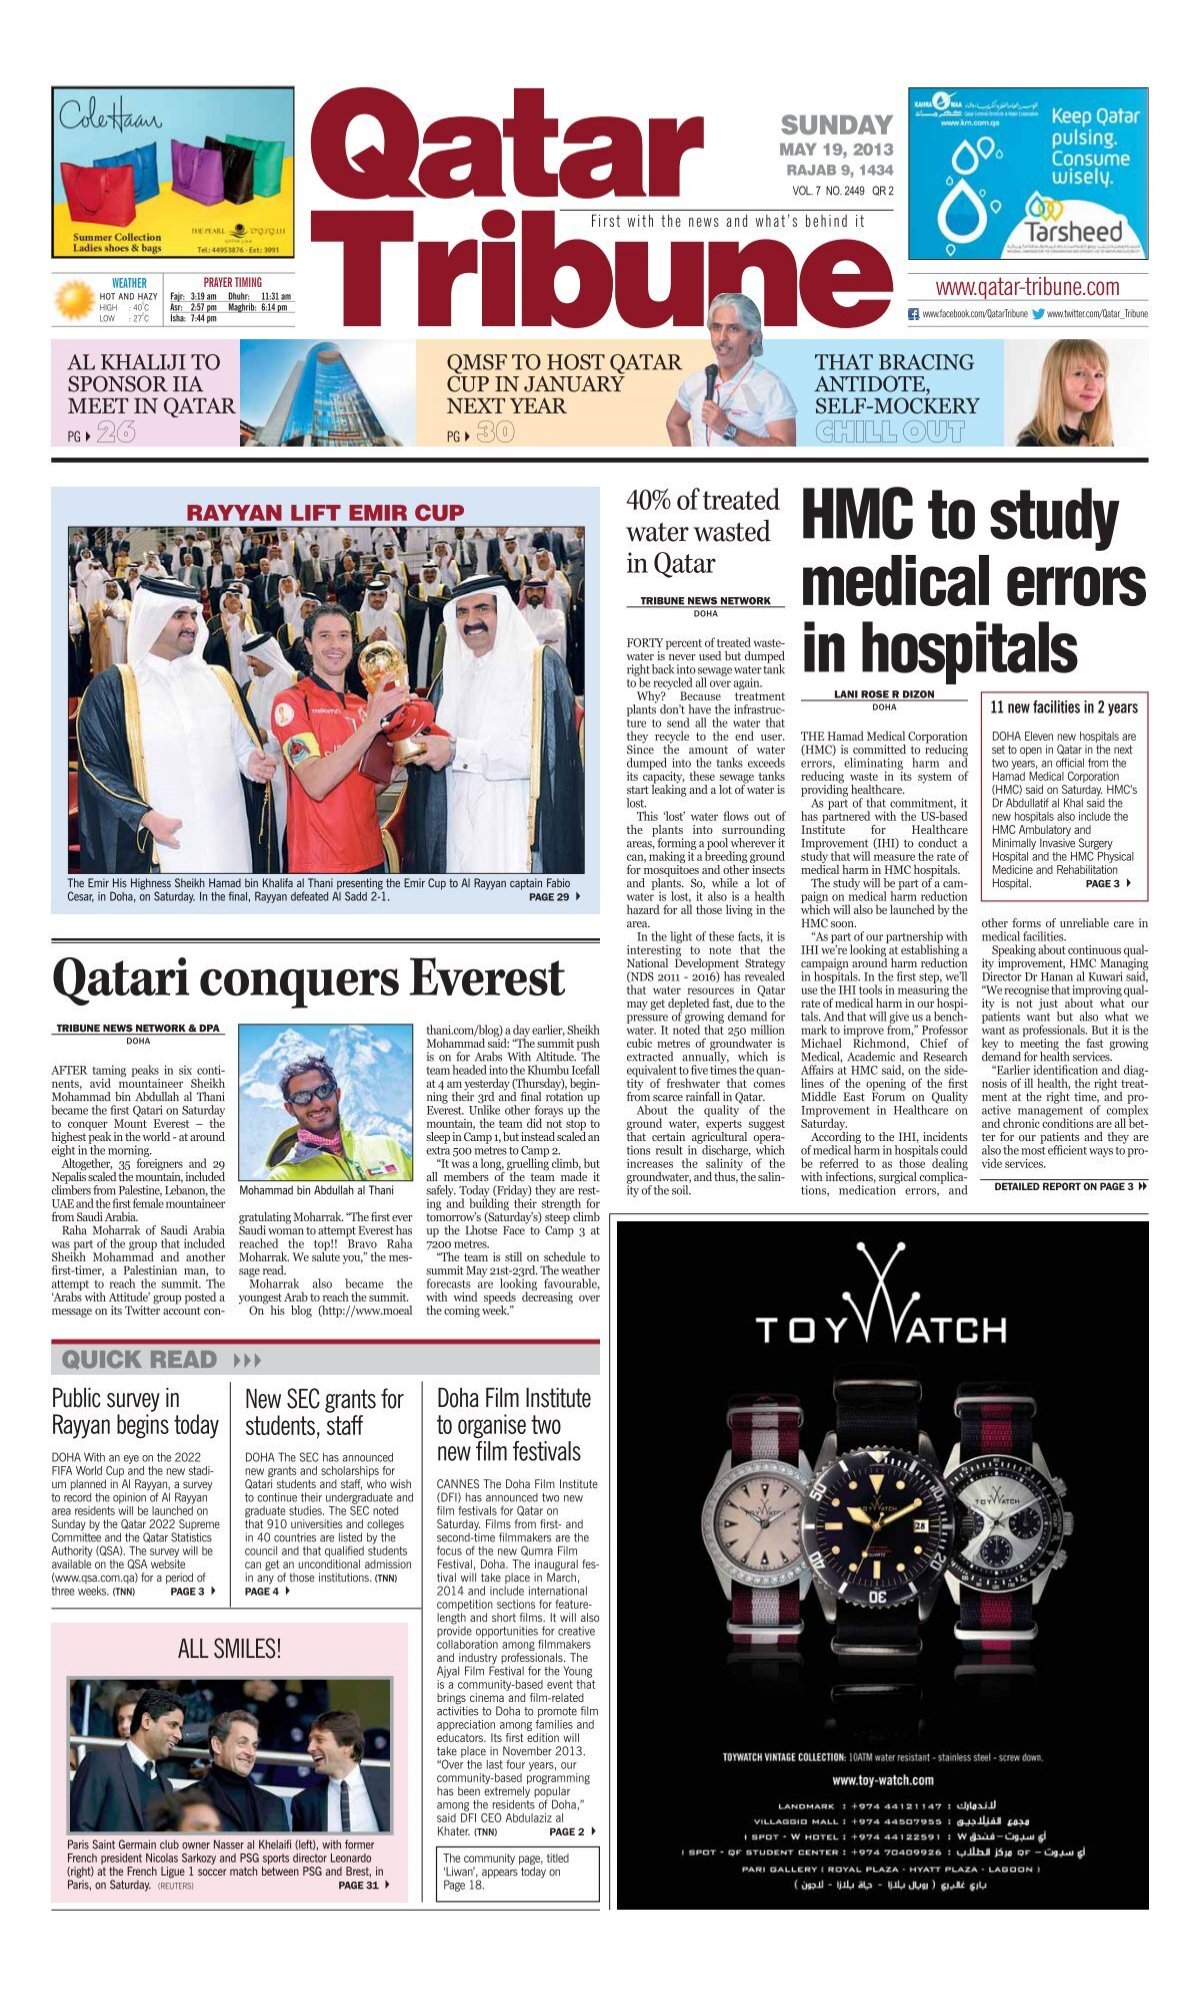 HMC to study medical errors in hospitals